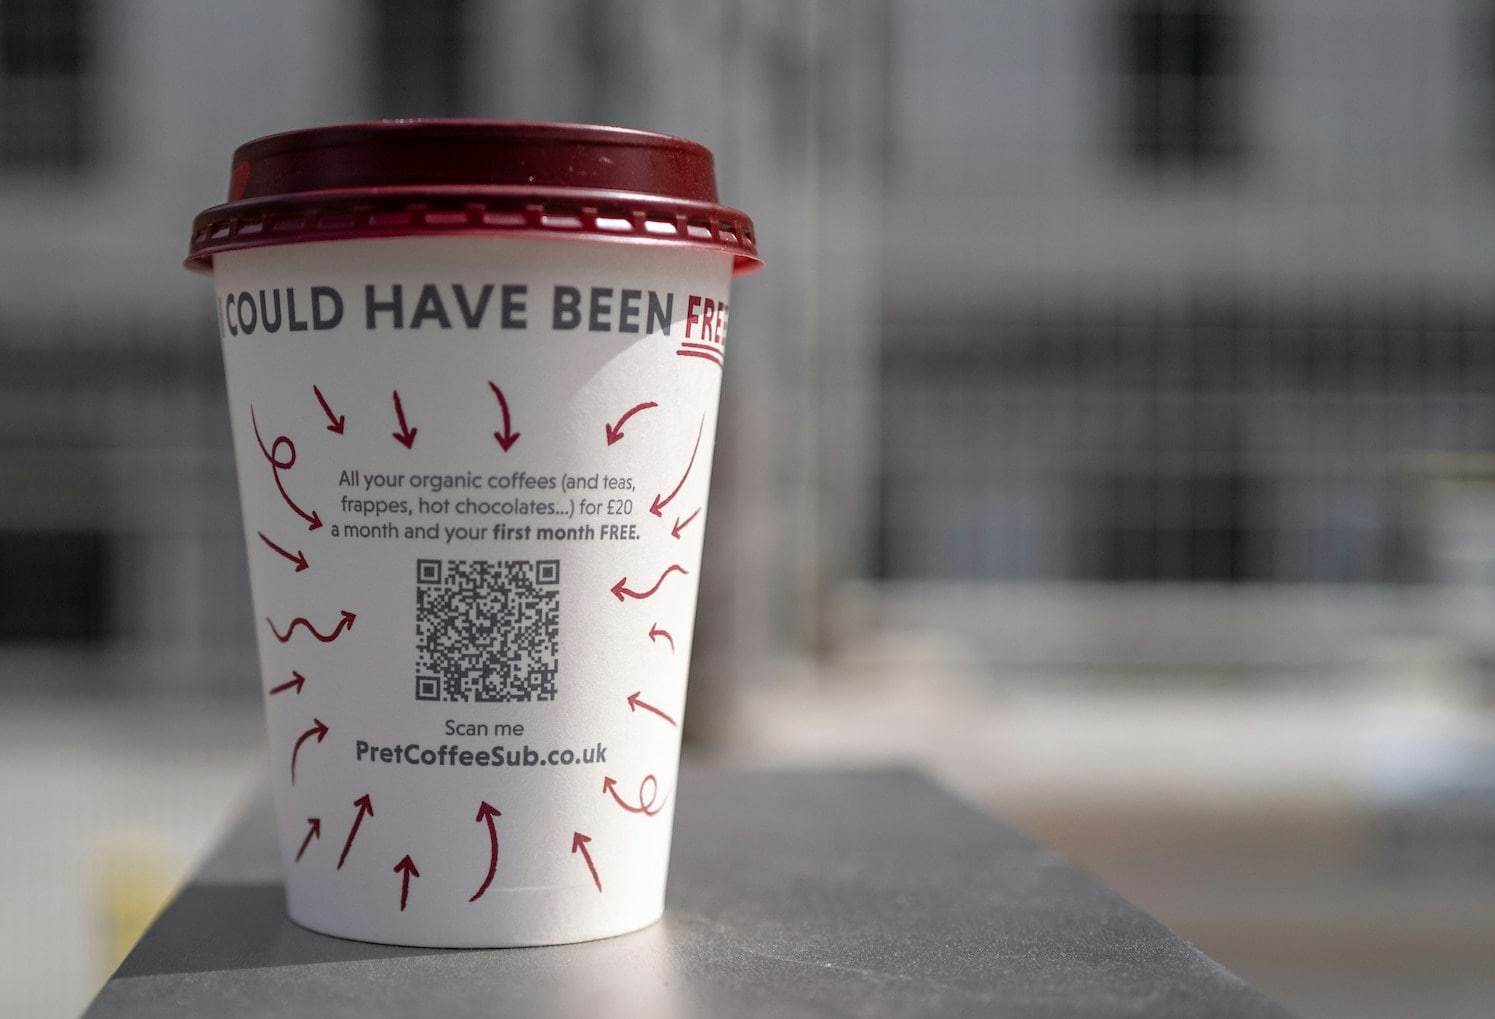 drive sales with QR codes on custom product packaging